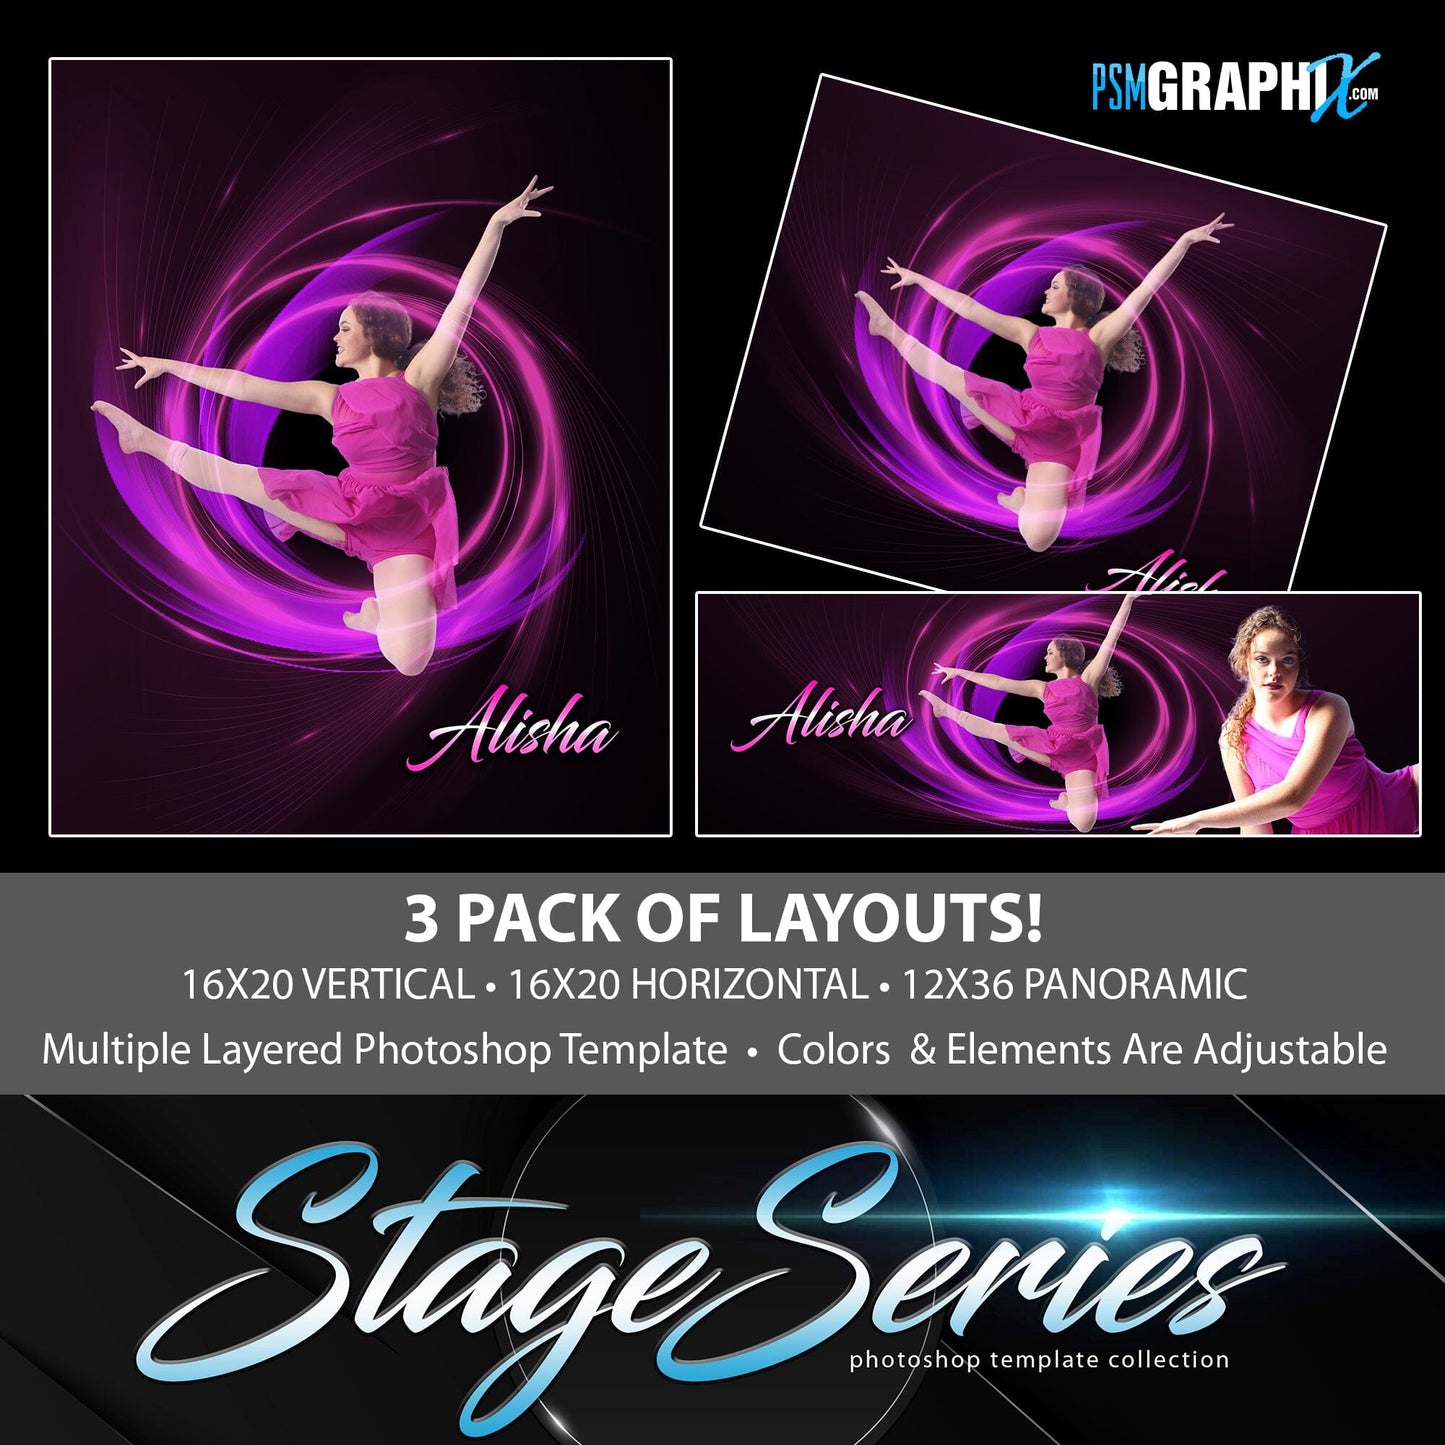 Vortex - Stage Series II - Photoshop Template 3 Pack-Photoshop Template - PSMGraphix